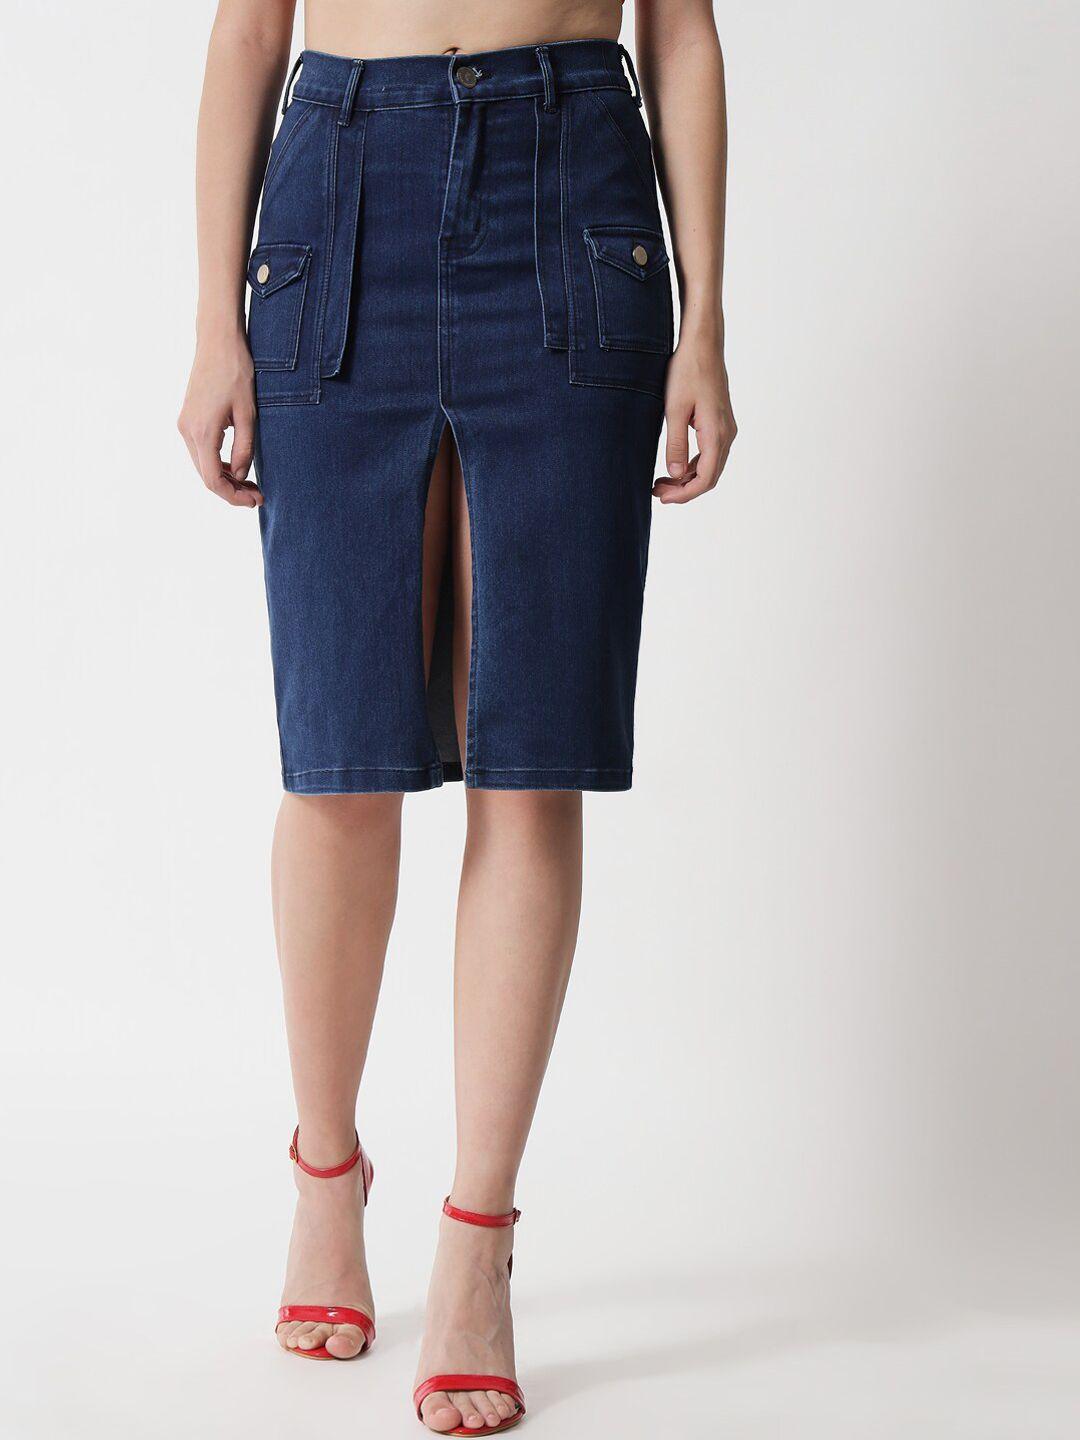 the-dry-state-women-blue-solid-pure-cotton-denim-skirts